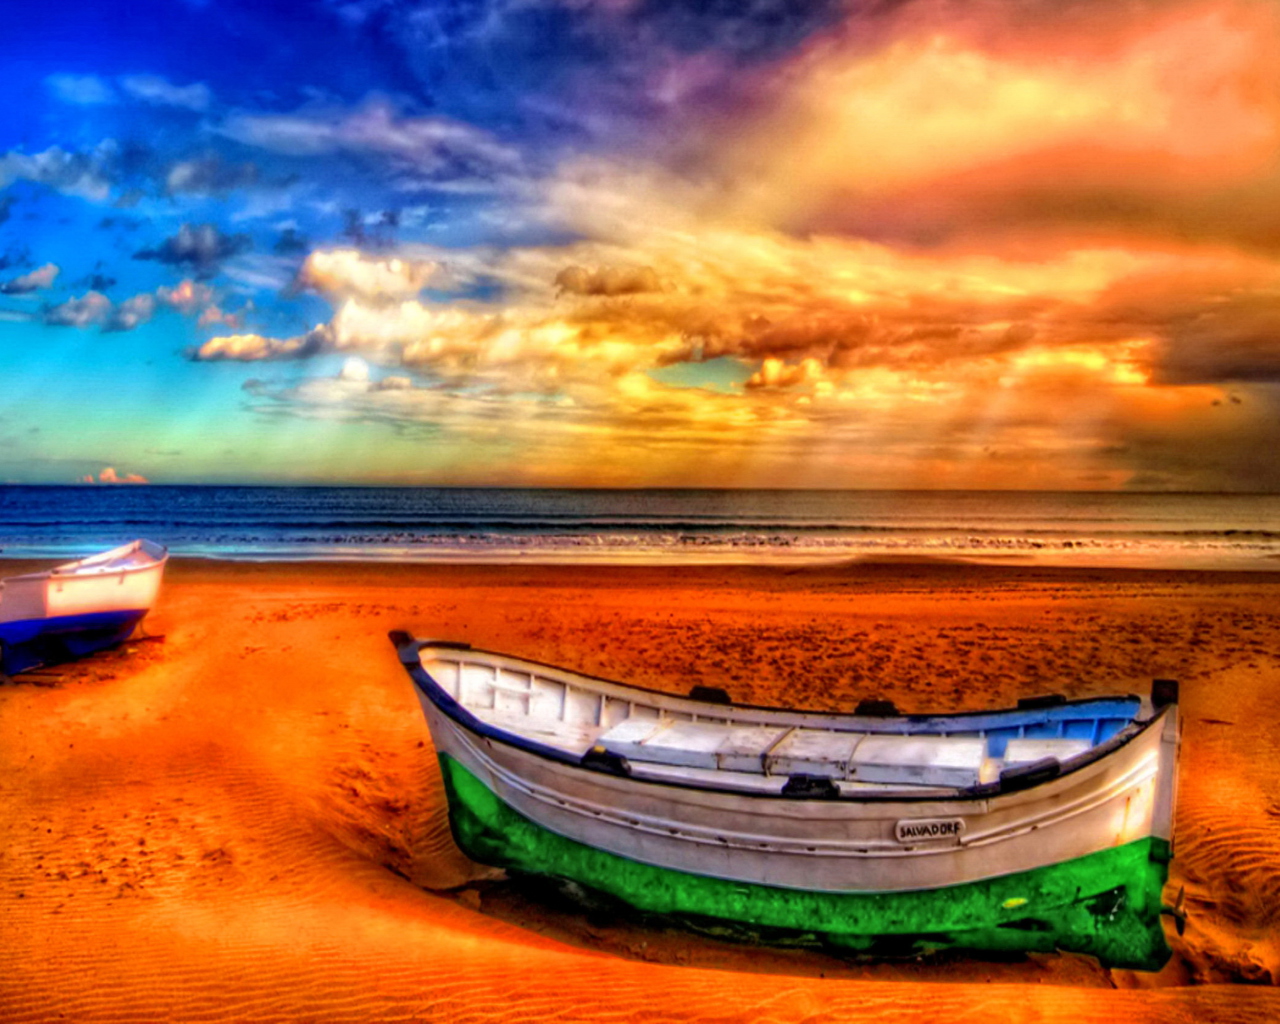 Seascape And Boat wallpaper 1280x1024